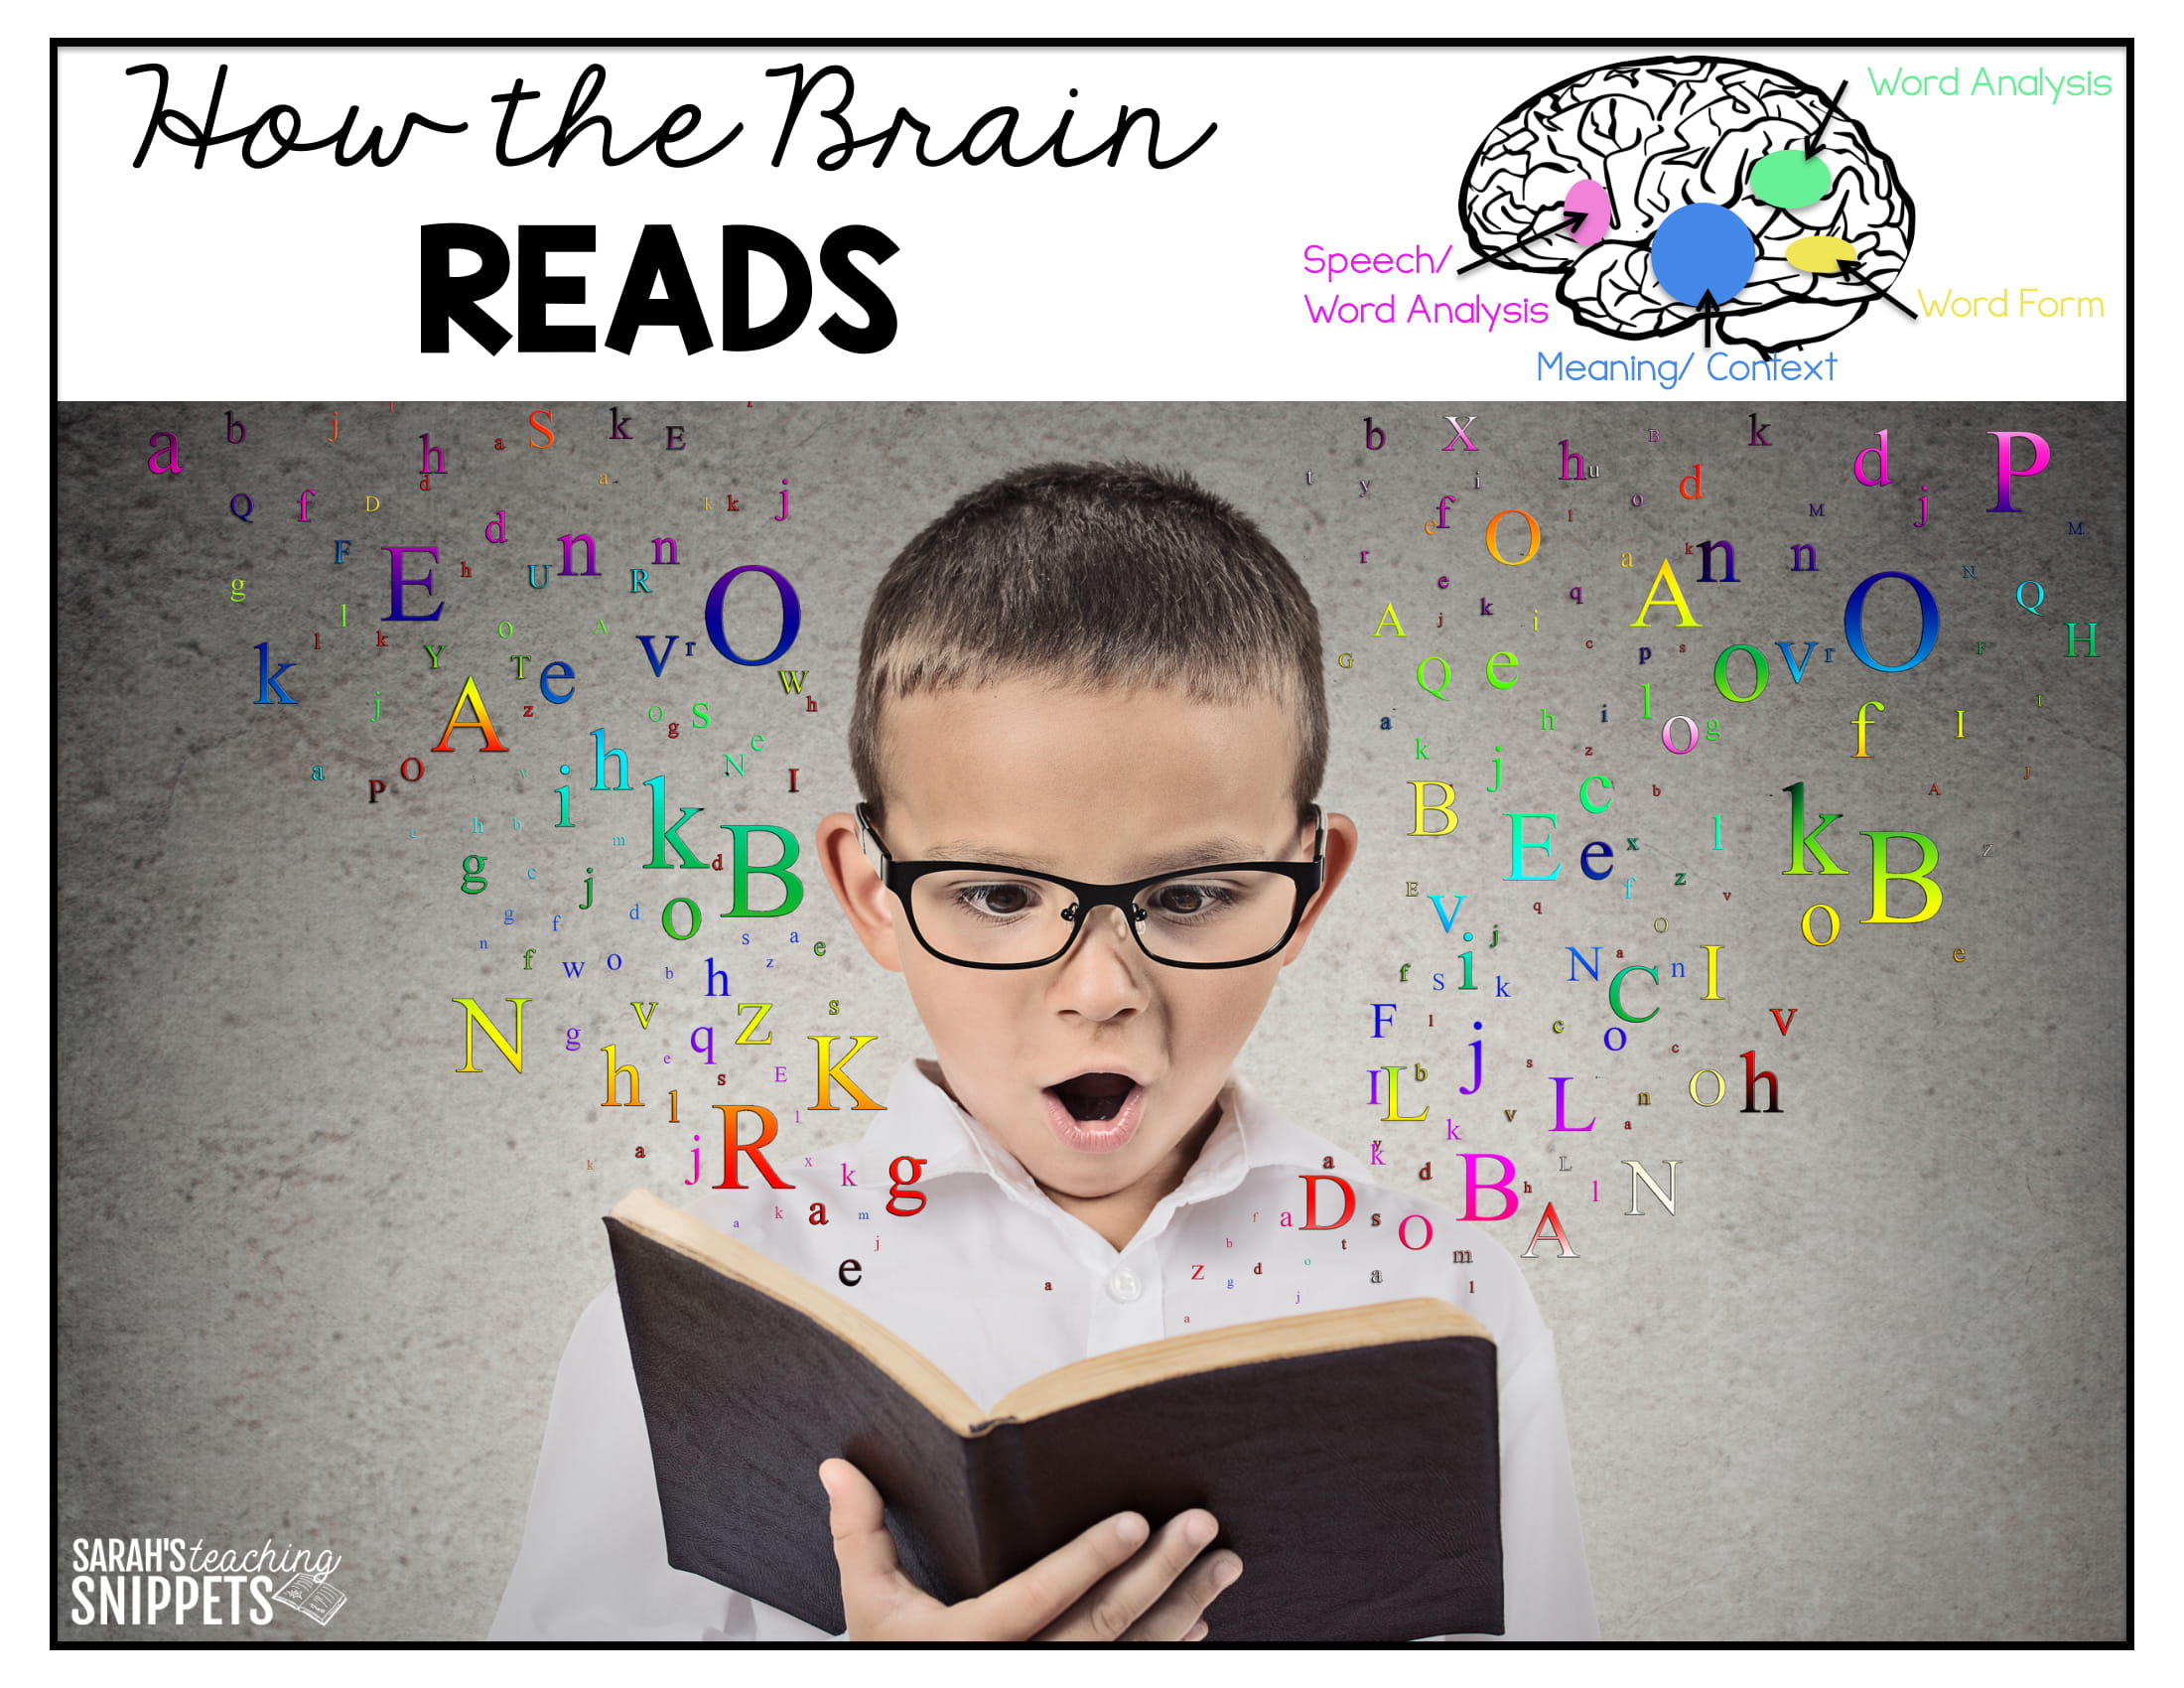 science of reading